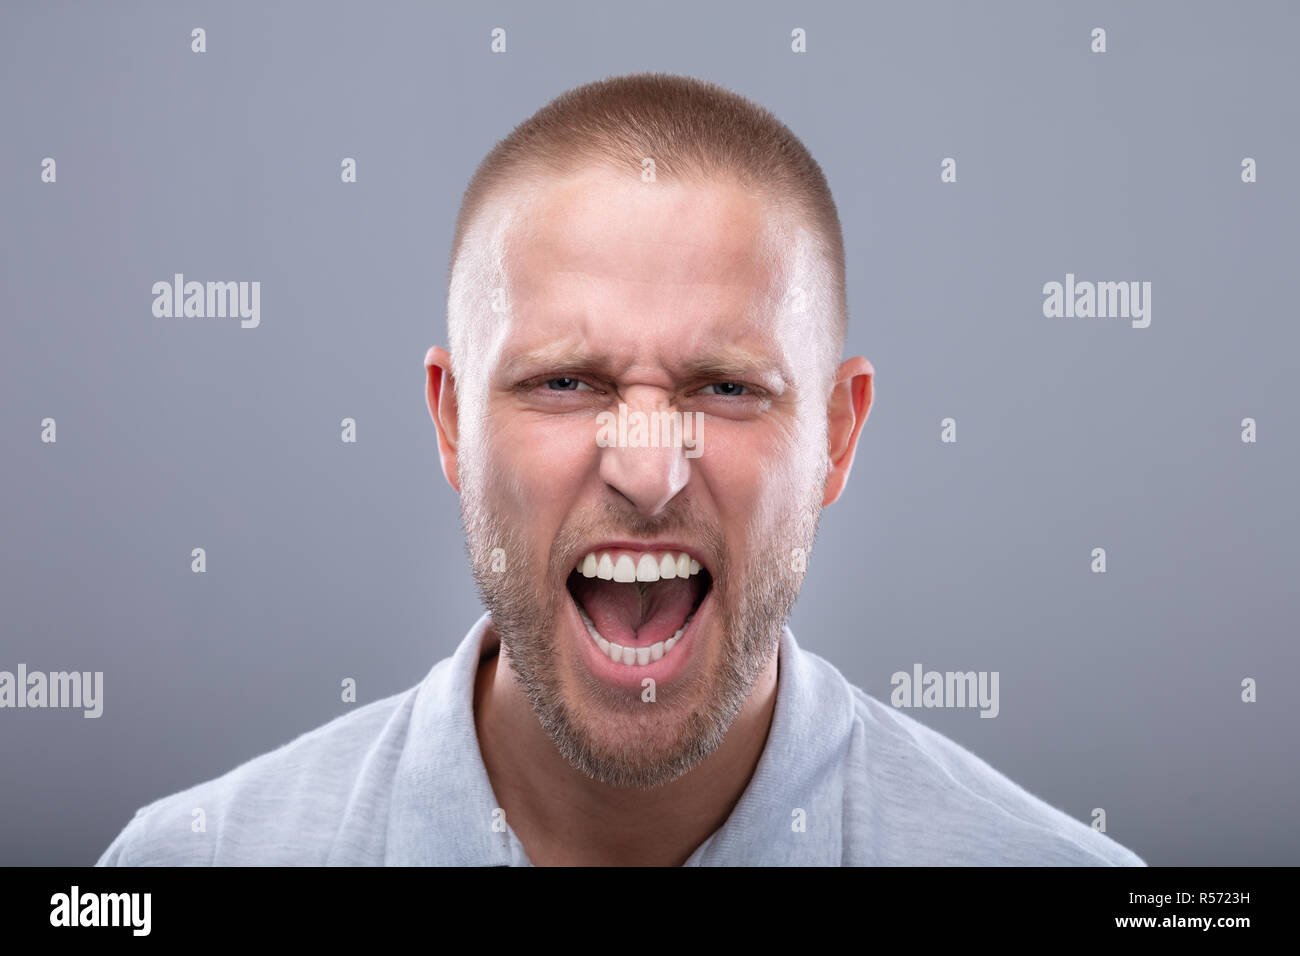 Portrait Of A Shouting Young Man On Grey Background Stock Photo